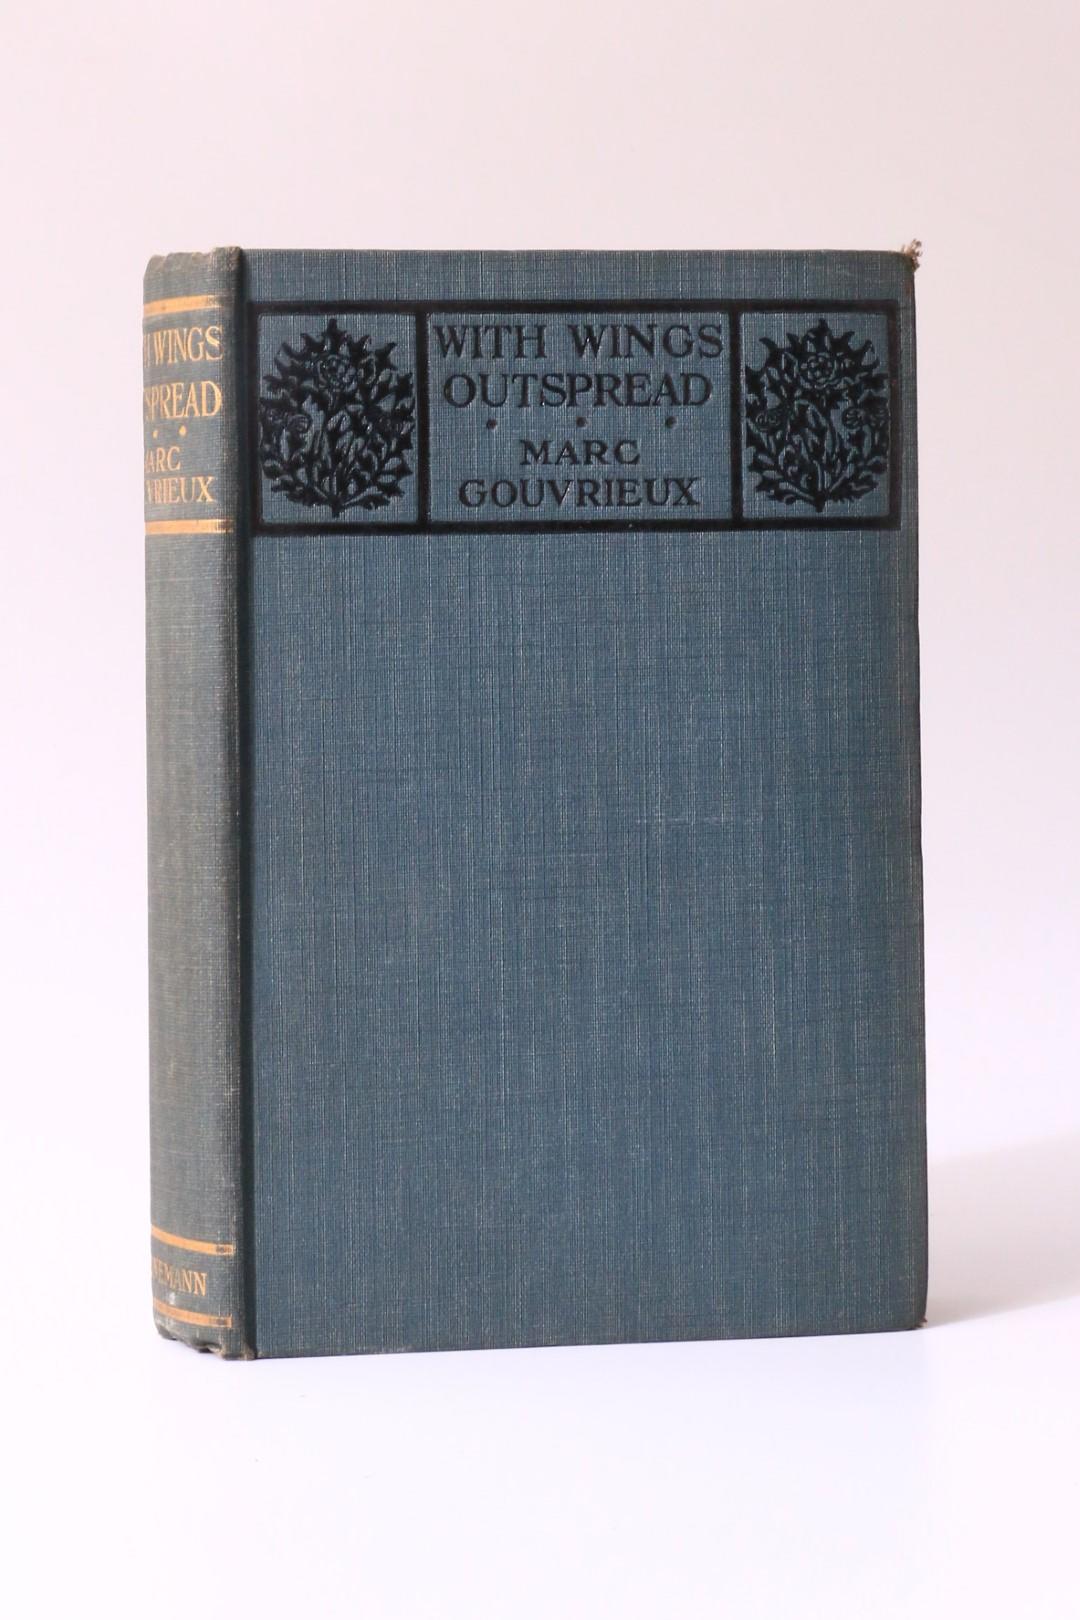 Marc Gouvrieux - With Wings Outspread - Heinemann, 1916, First Edition.